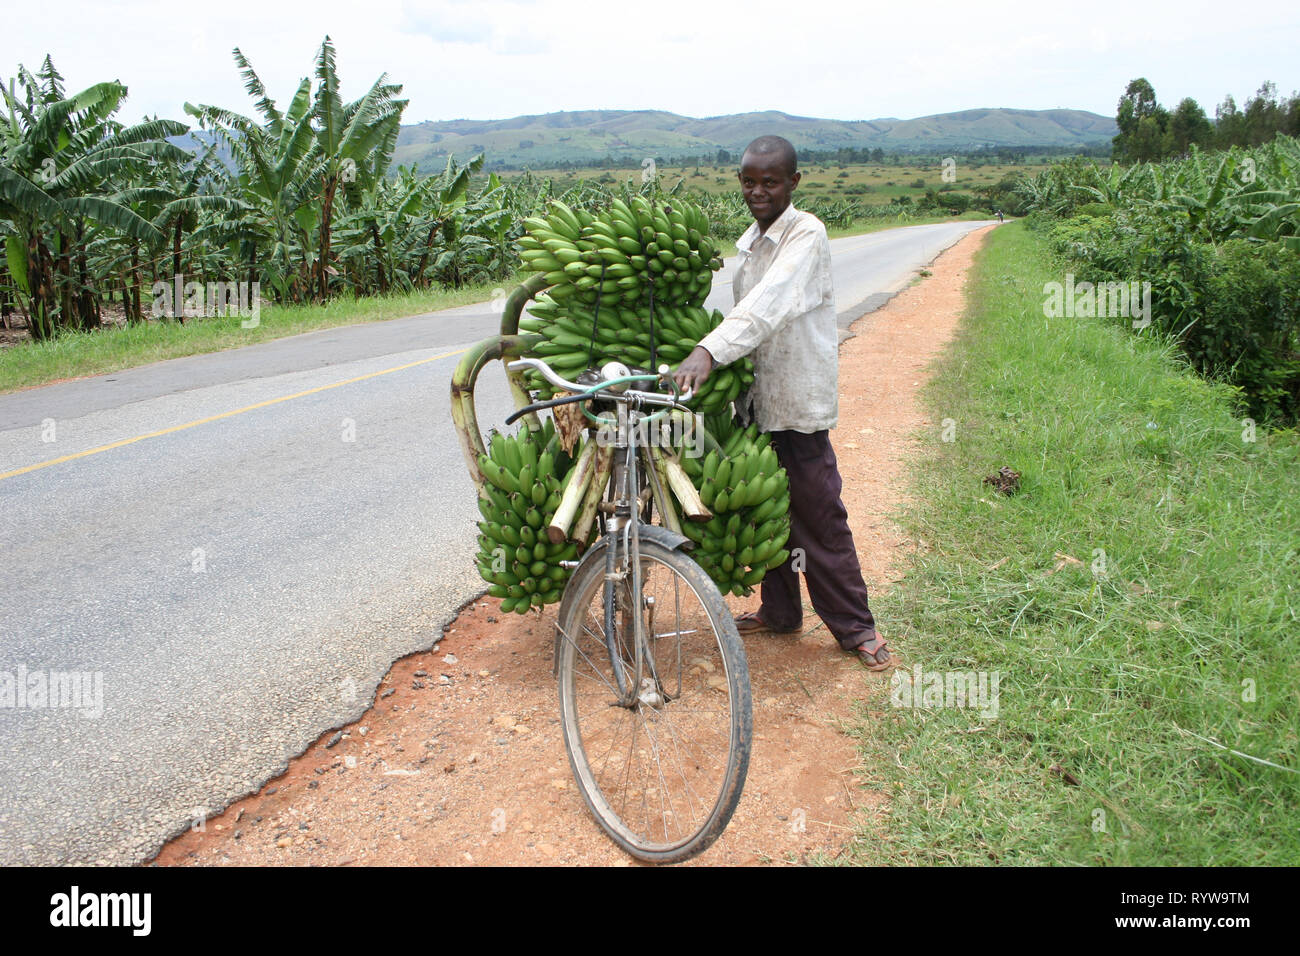 A man carrying bunches of fresh green plantains (matooke) on his bicycle  to sell at the market in Western Uganda. Stock Photo